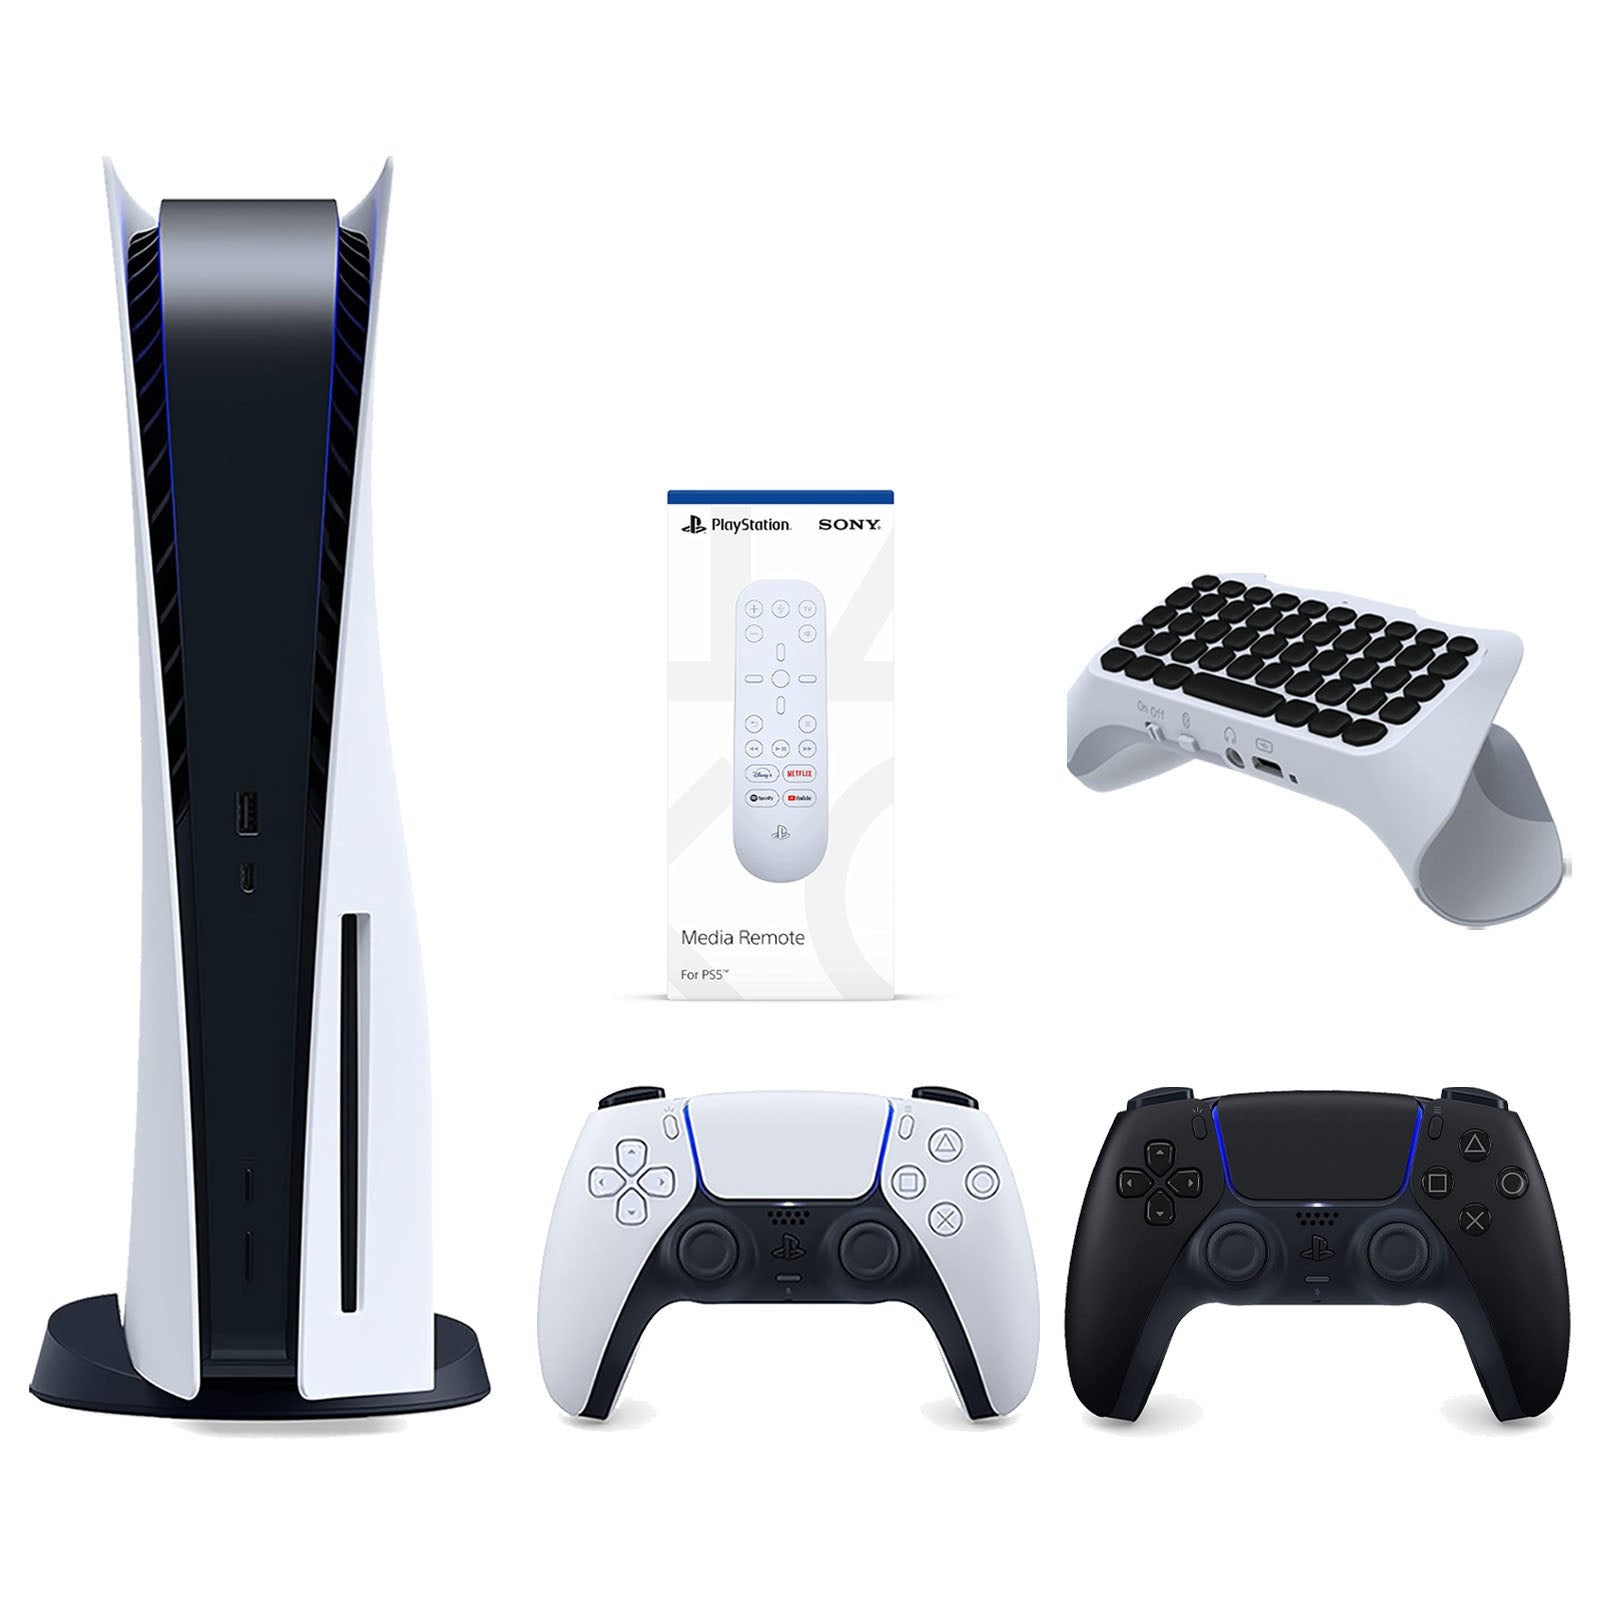 Sony Playstation 5 Disc Version Console with Extra Black Controller, Media Remote and Surge QuickType 2.0 Wireless PS5 Controller Keypad Bundle - Pro-Distributing